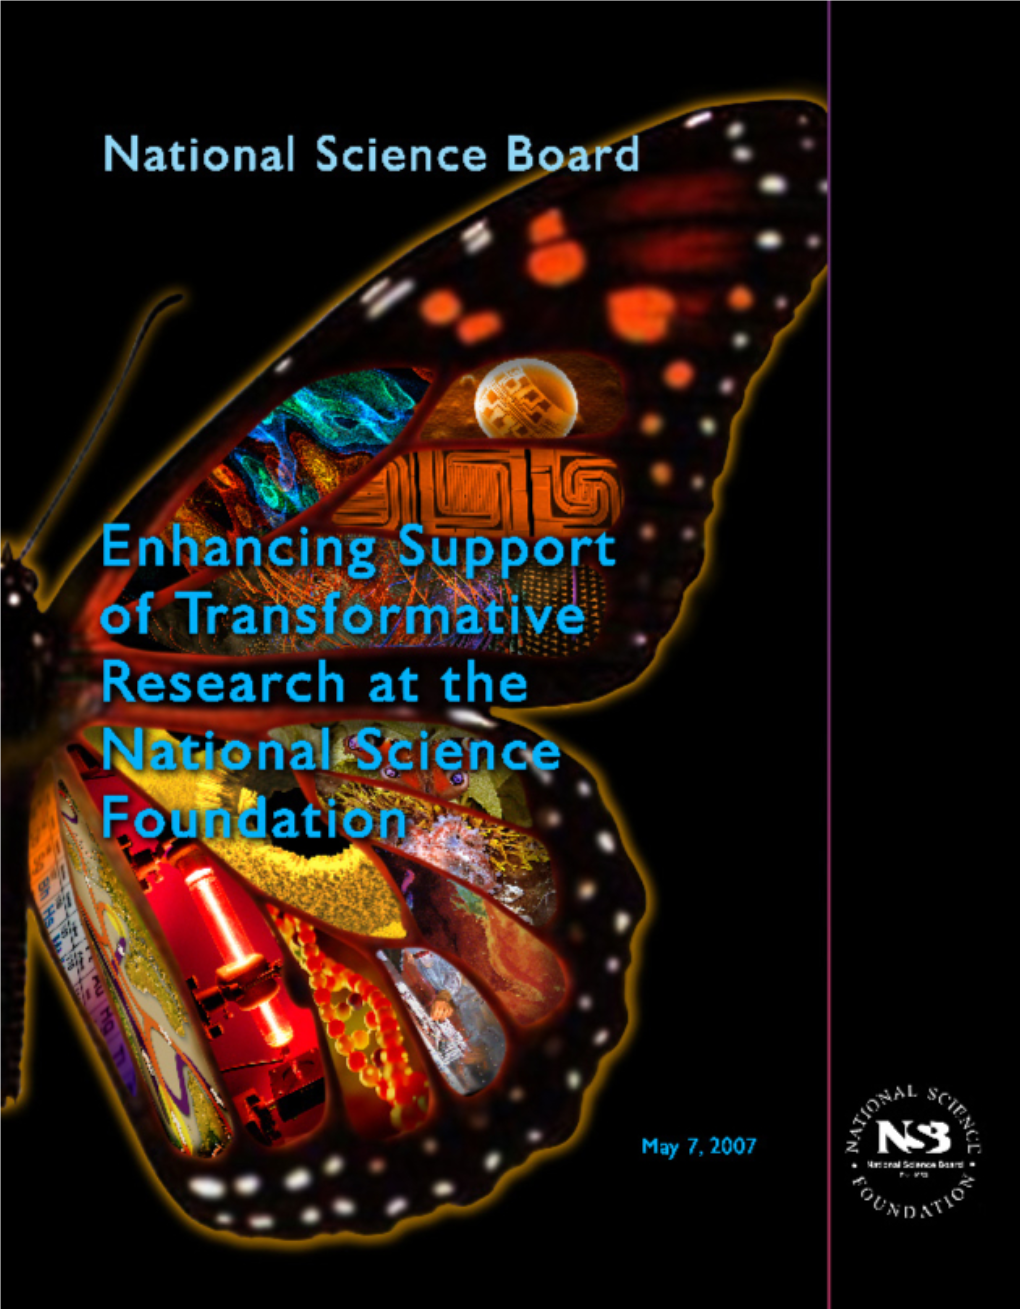 Enhancing Support of Transformative Research at the National Science Foundation